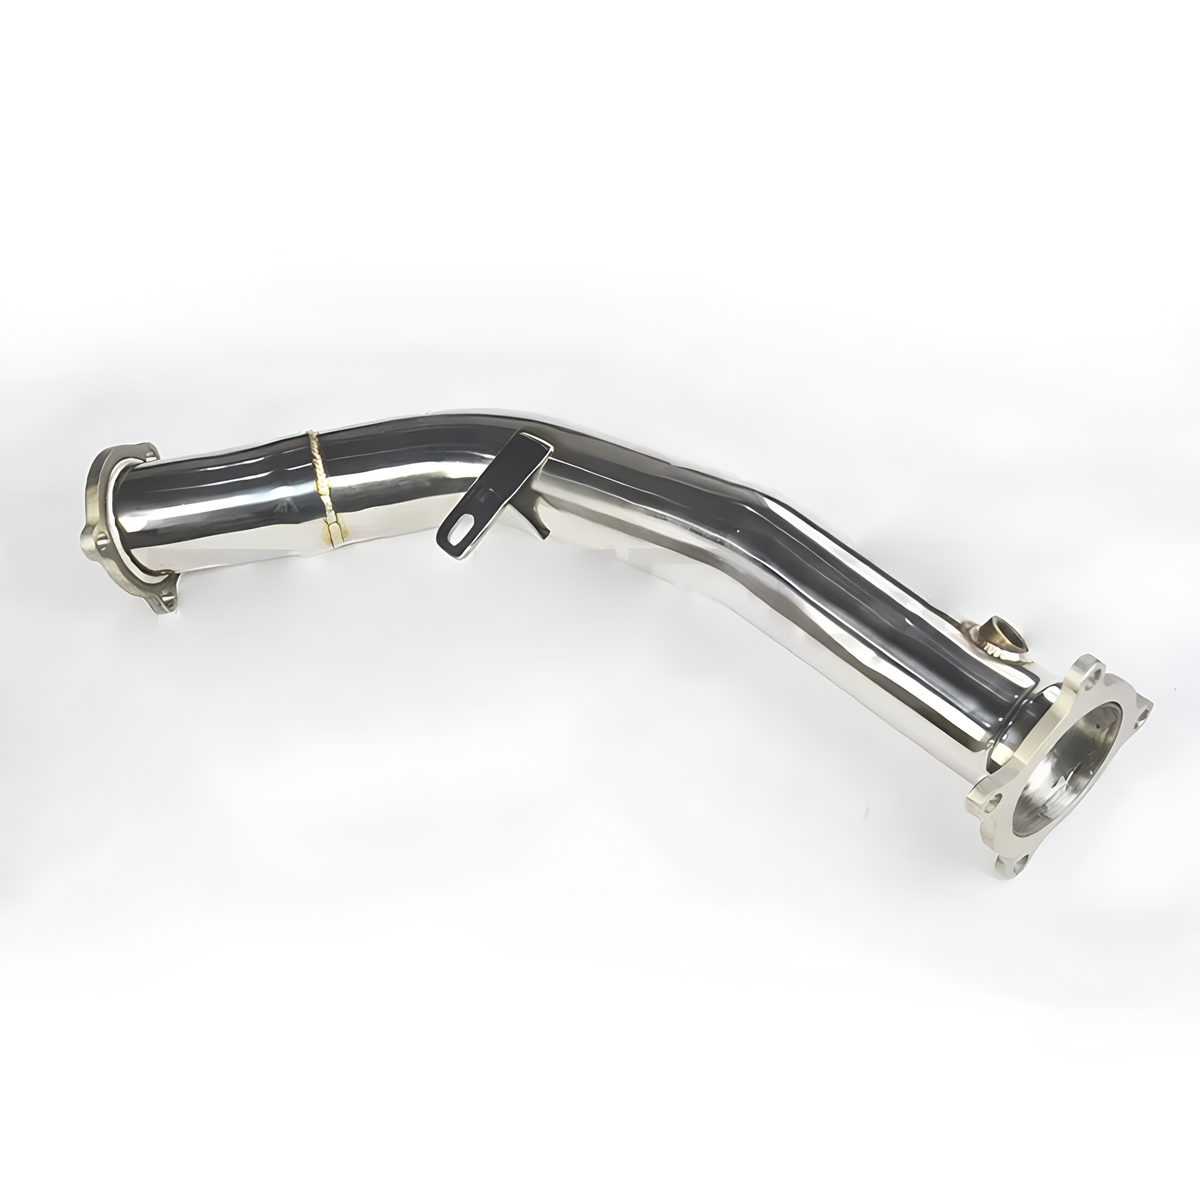 Rstype catless Downpipe For Audi B8 A4/A5 Q5 Quattro 2.0T Turbo